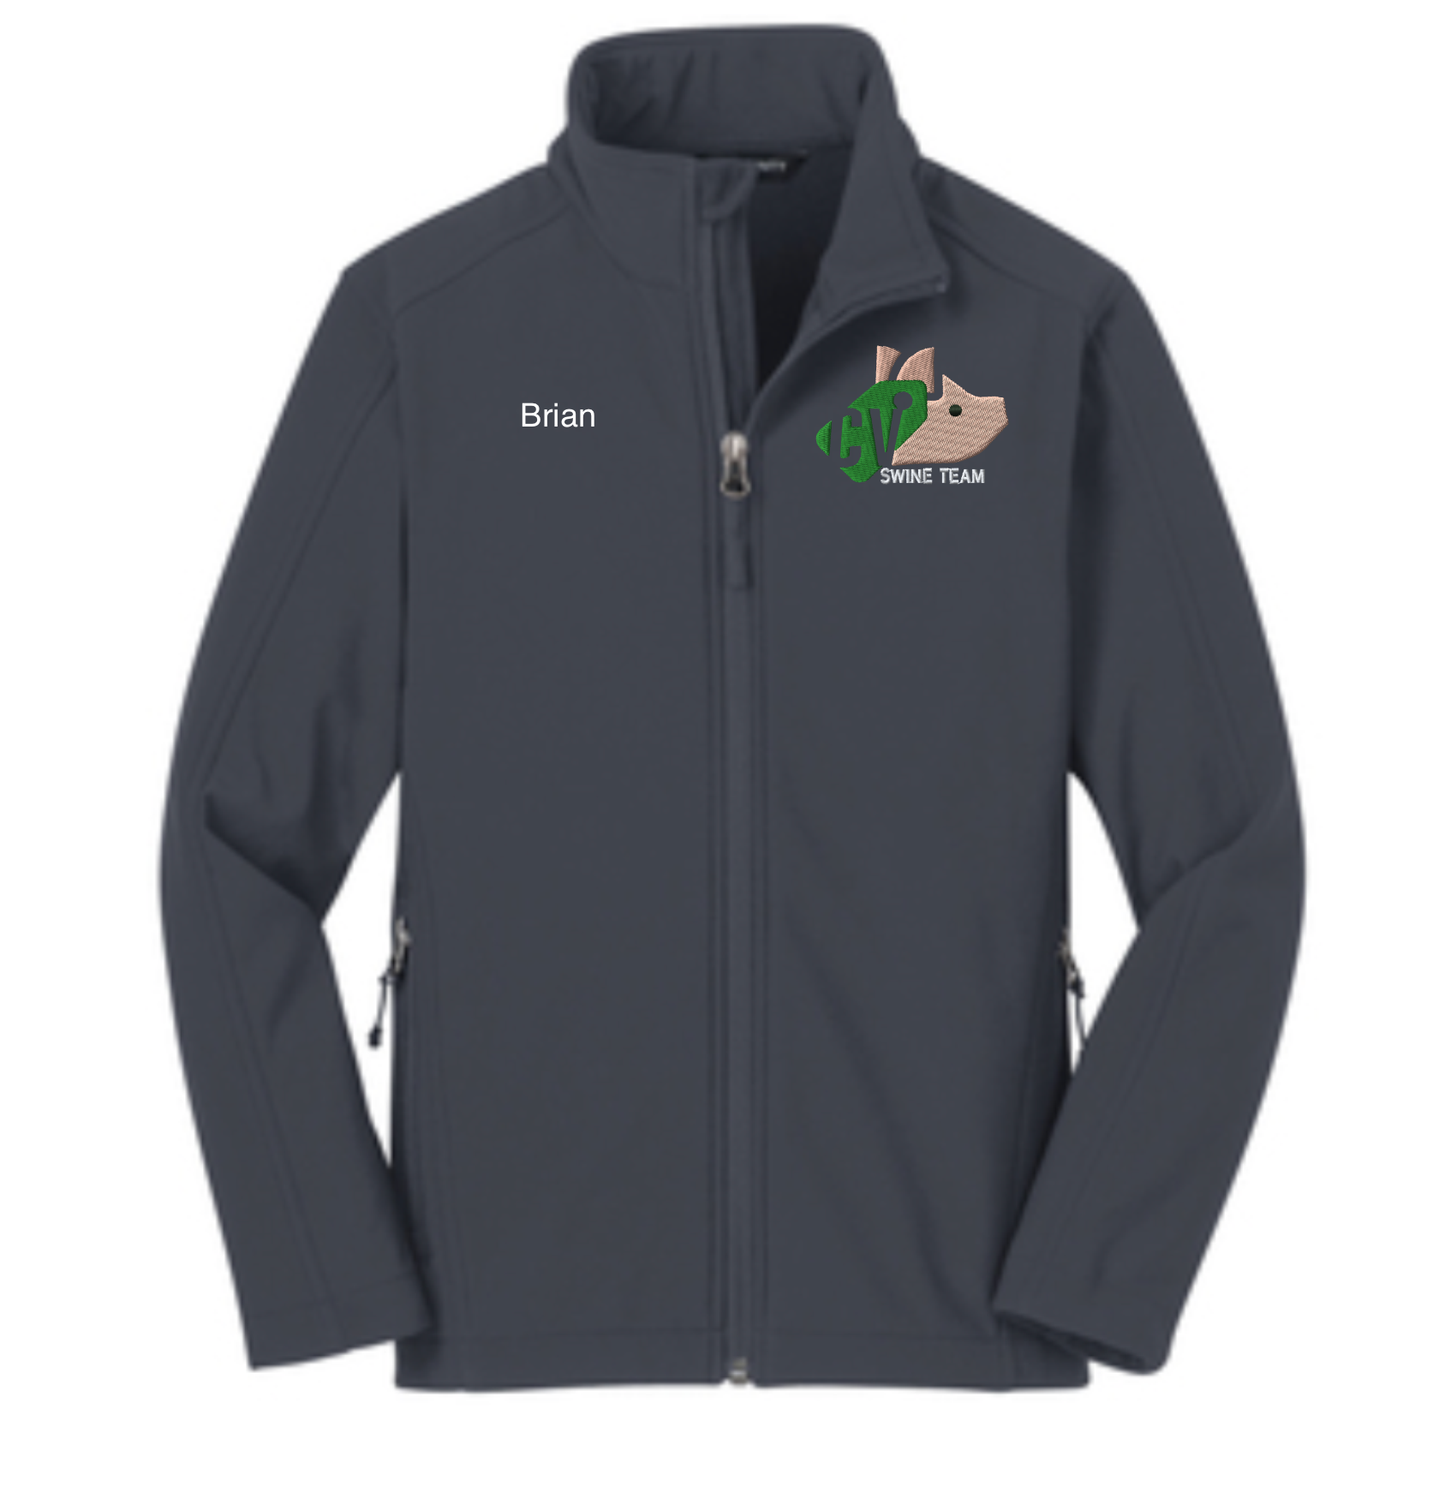 Youth Carmel Valley 4-H Personalized Swine Team 4-H Port Authority Soft Shell Jacket